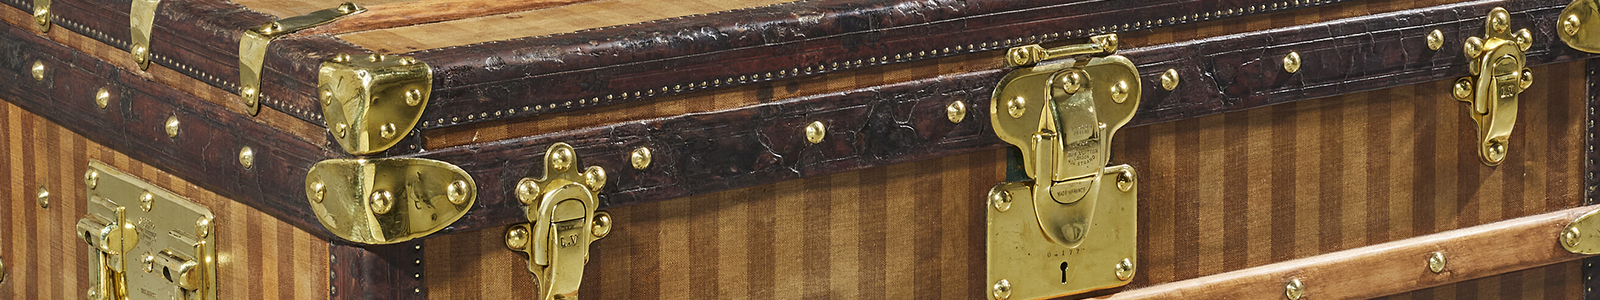 Legendary Trunks : A European Private Collection